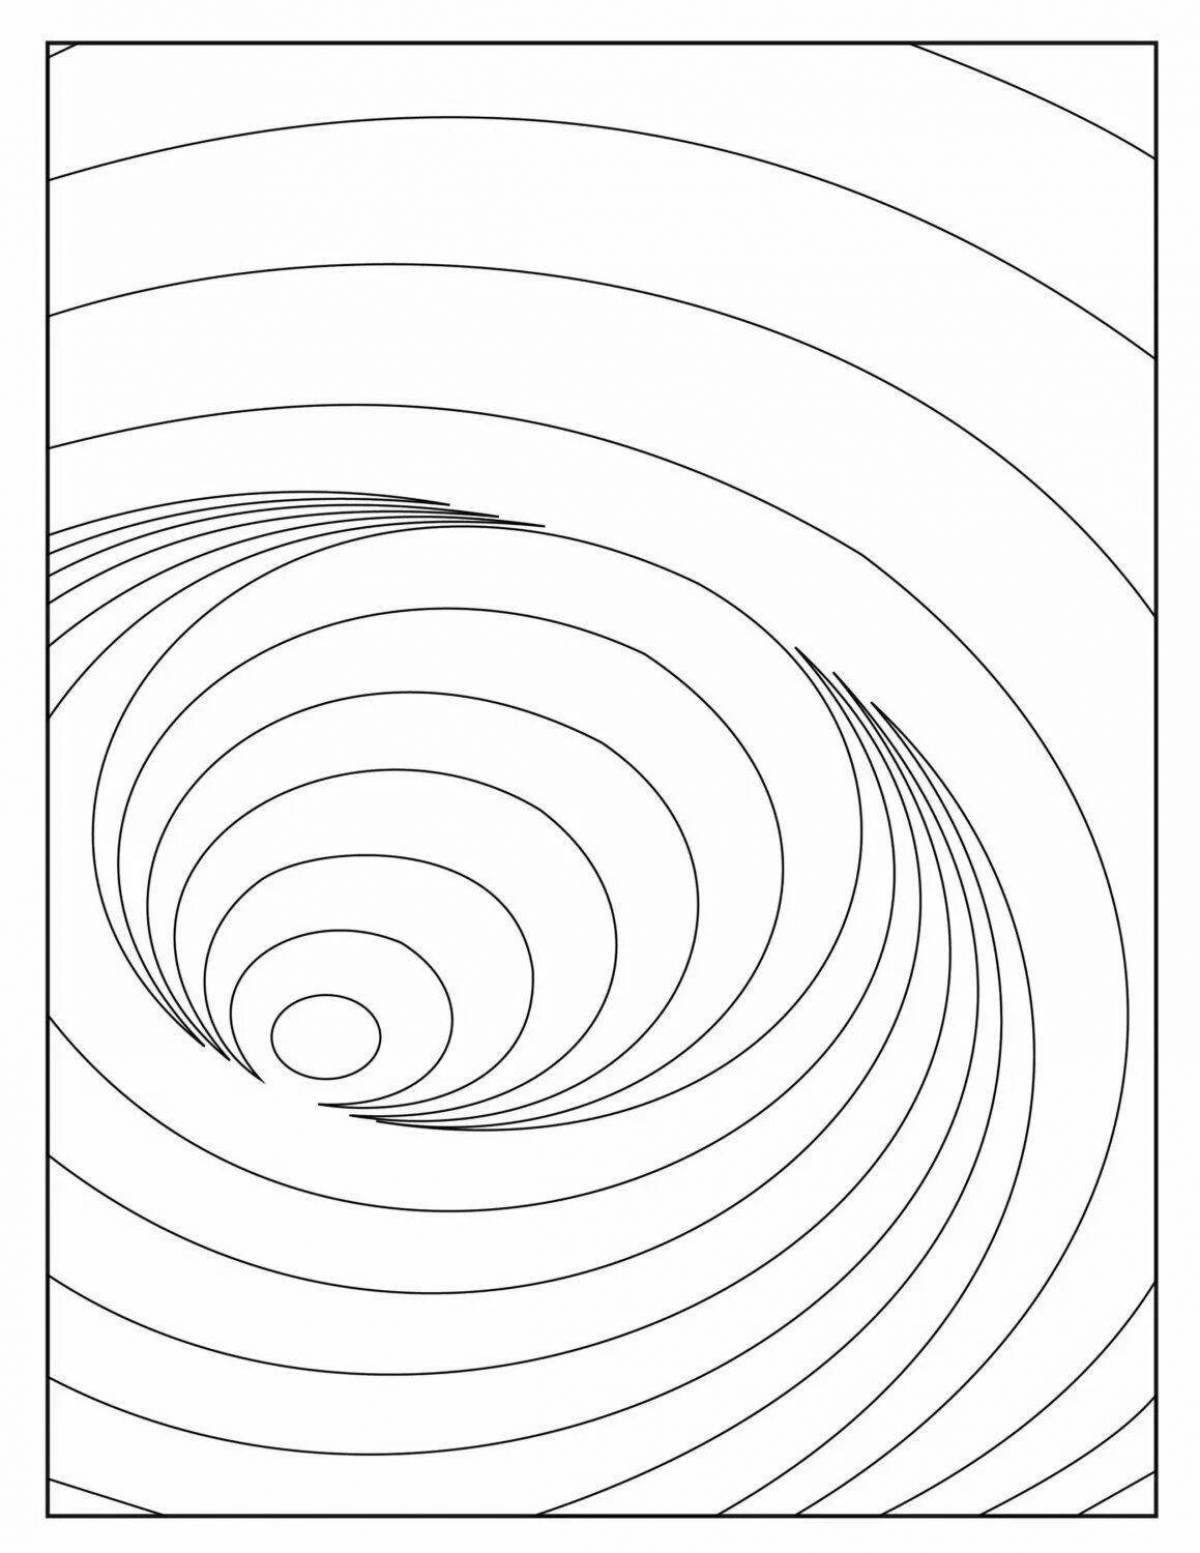 Harry Potter Glitter Round Spiral Coloring Page